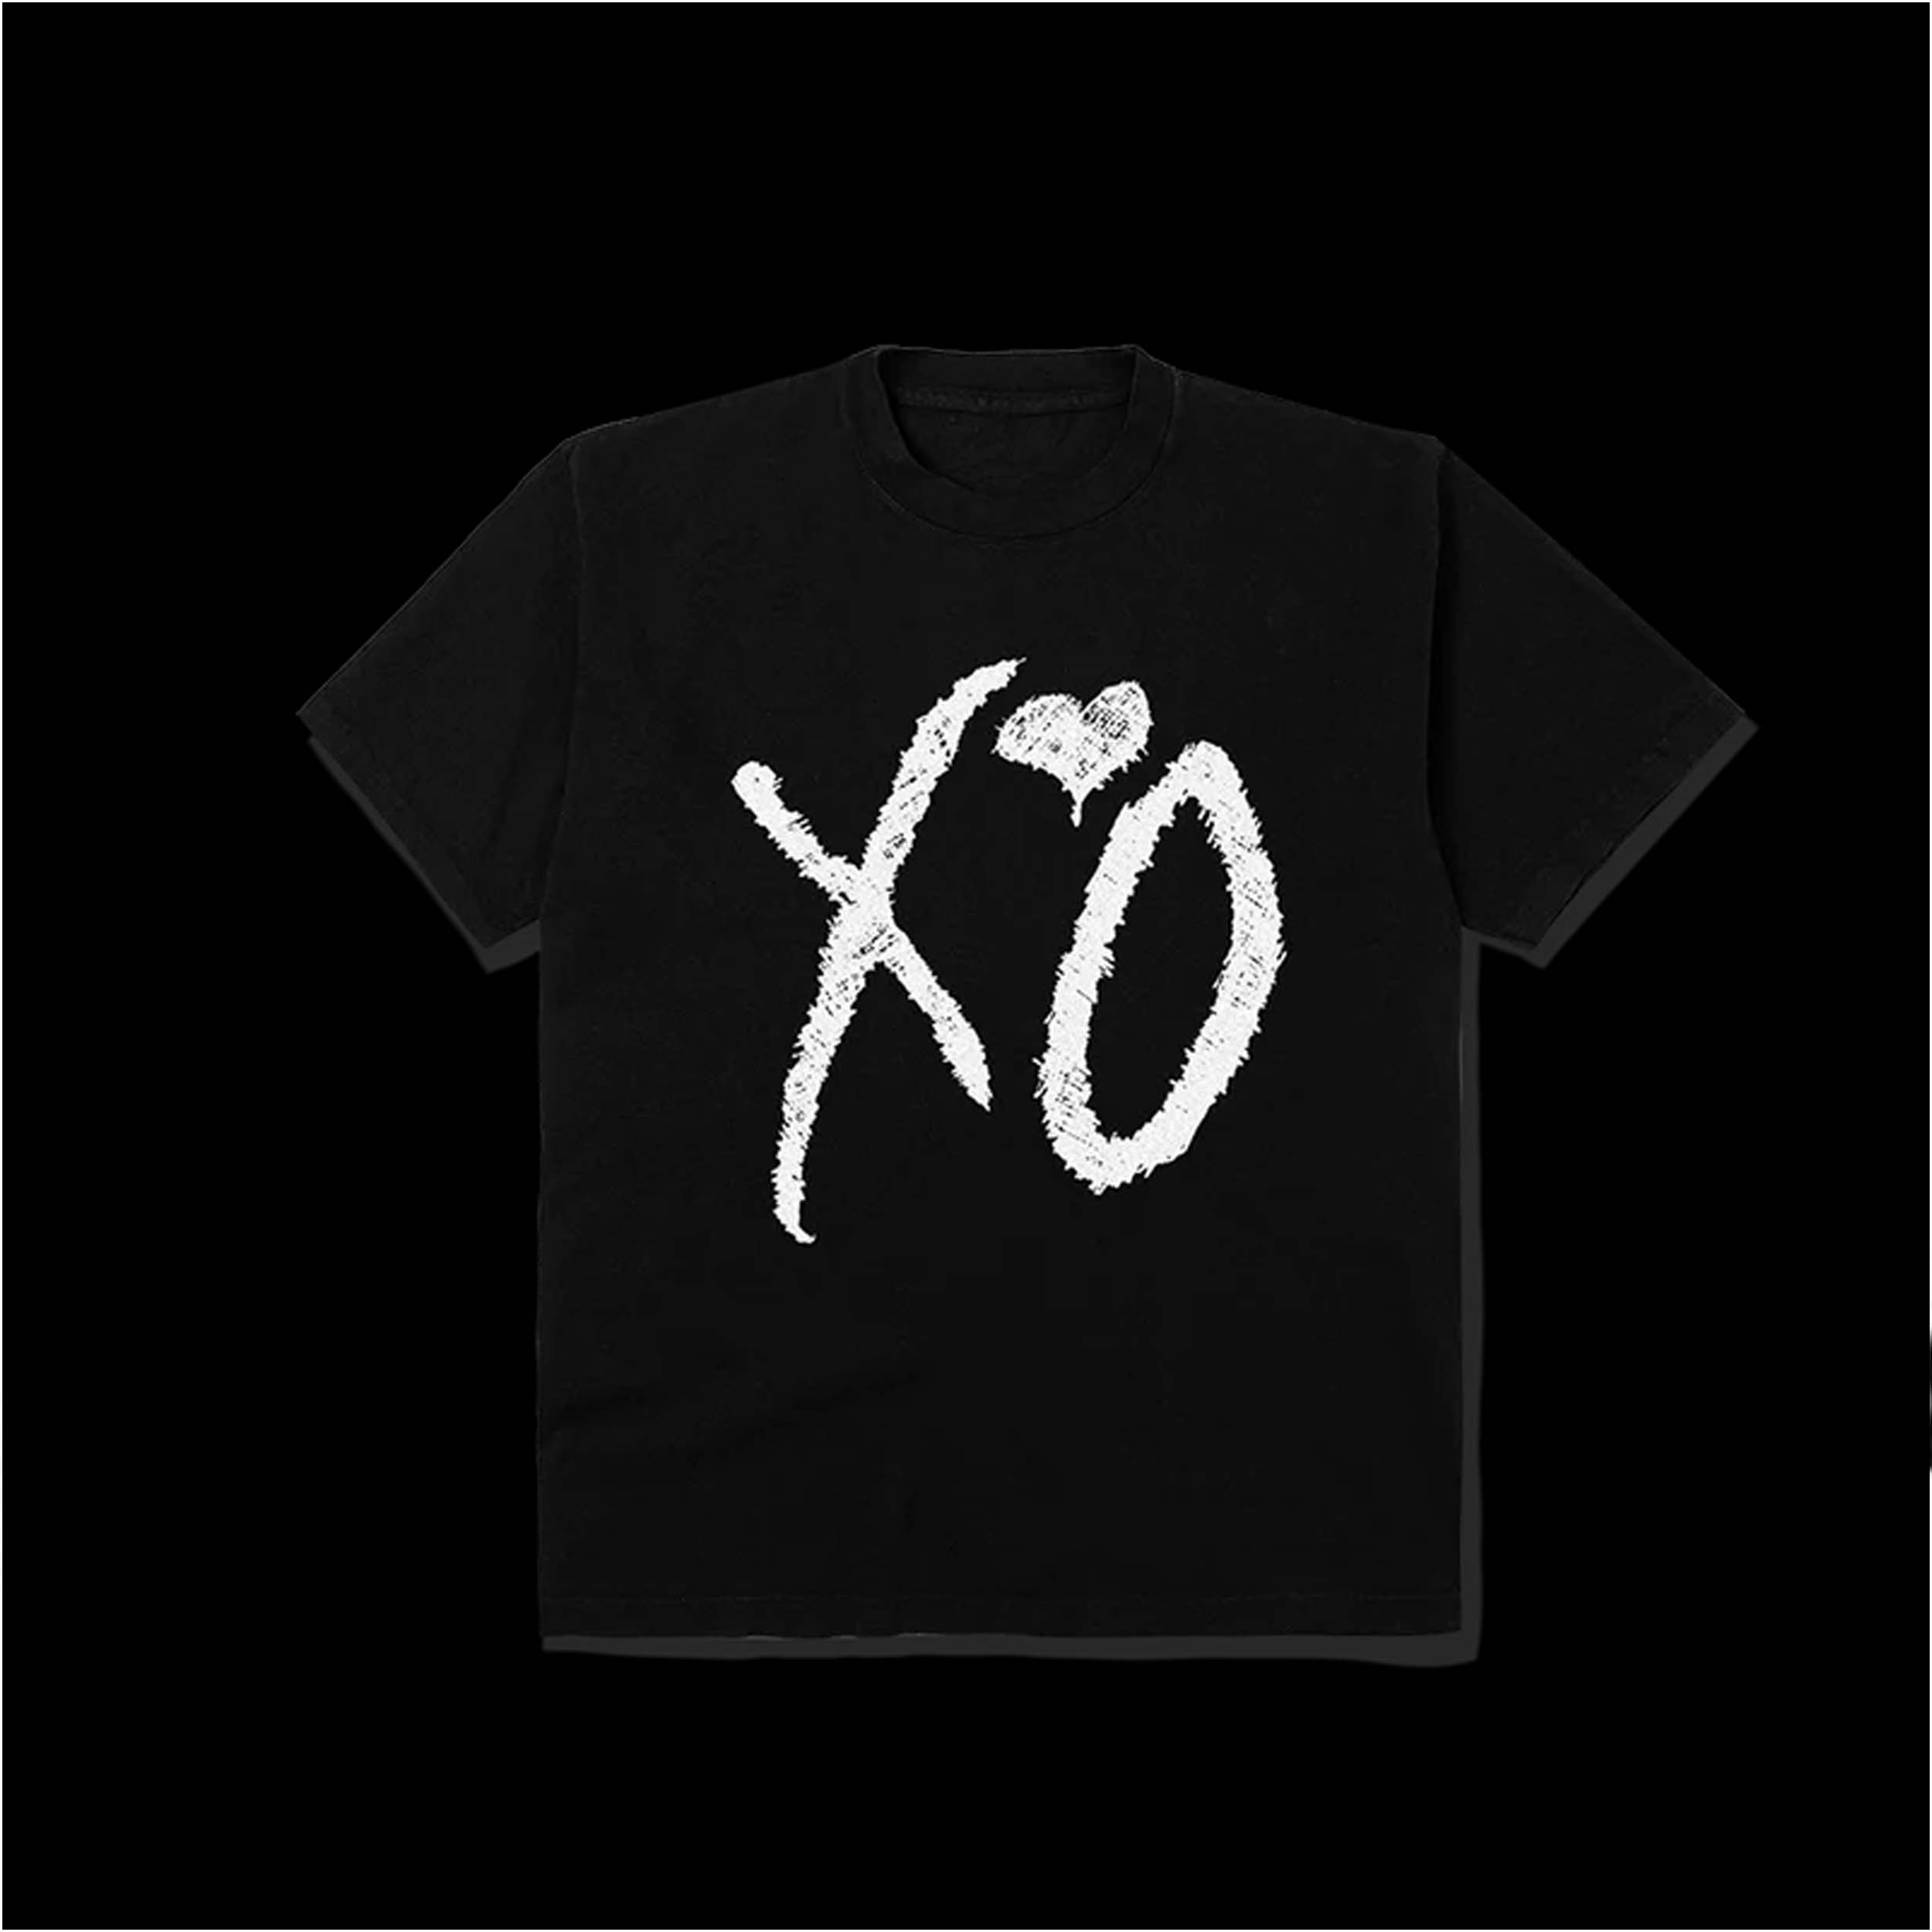 The Weeknd After Hours Til Dawn Tour Merch Hoodie : r/TheWeeknd